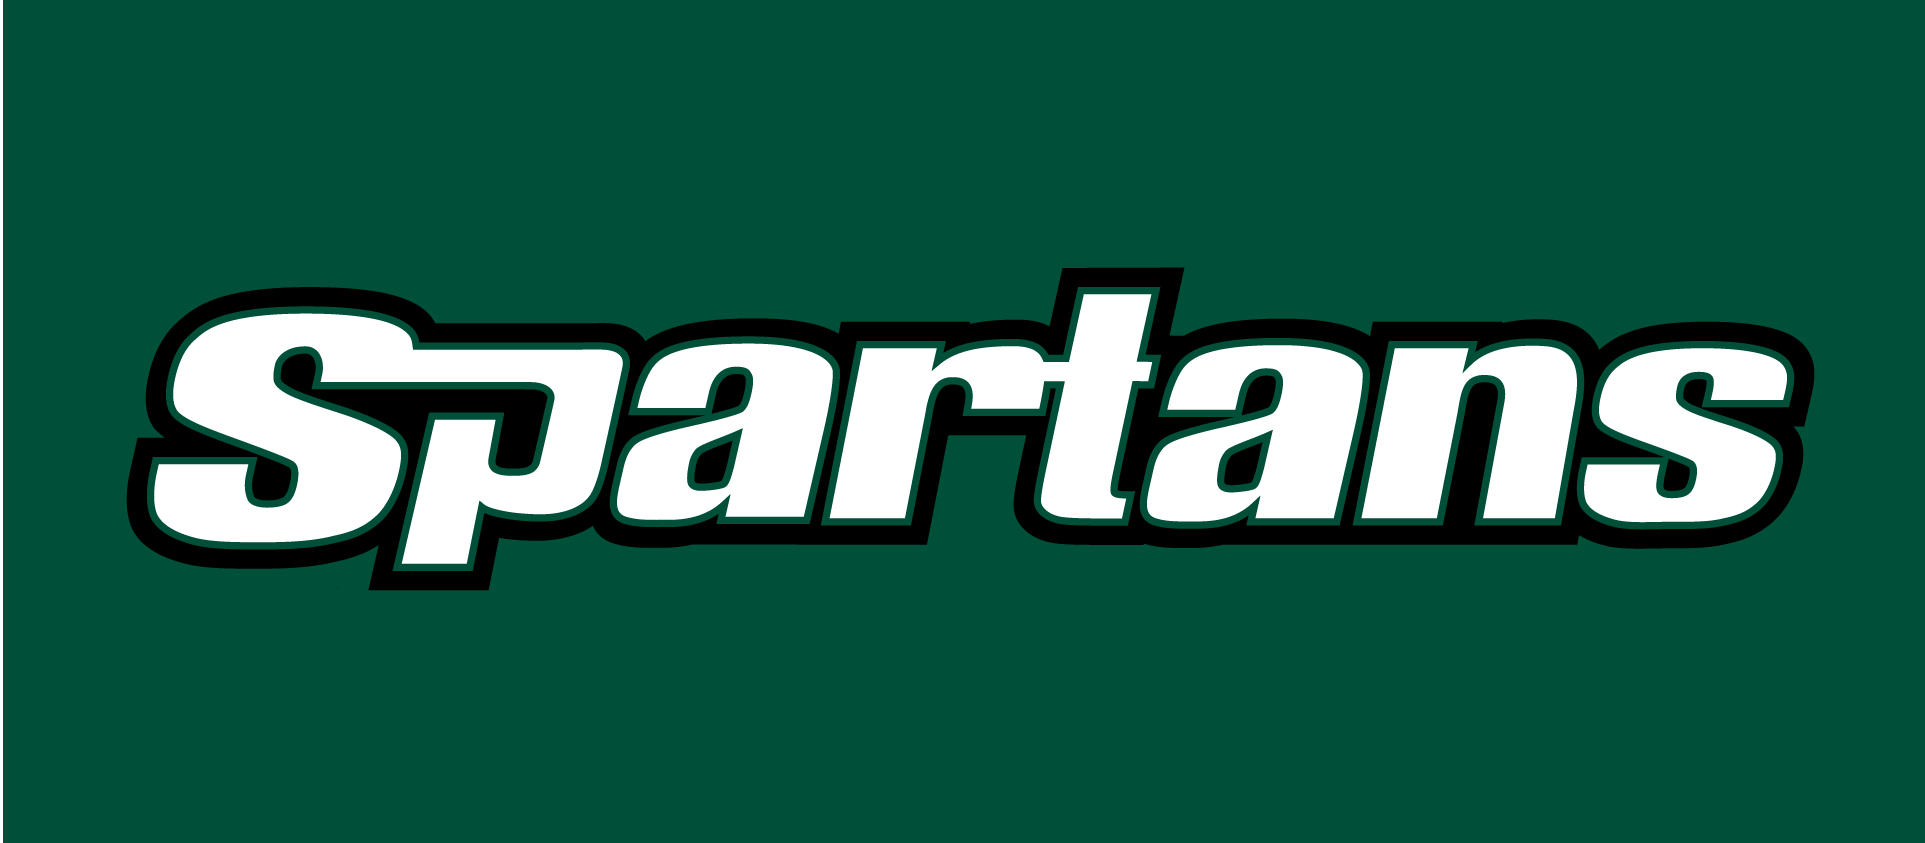 USC Upstate Spartans 2003-2010 Wordmark Logo v2 iron on transfers for T-shirts